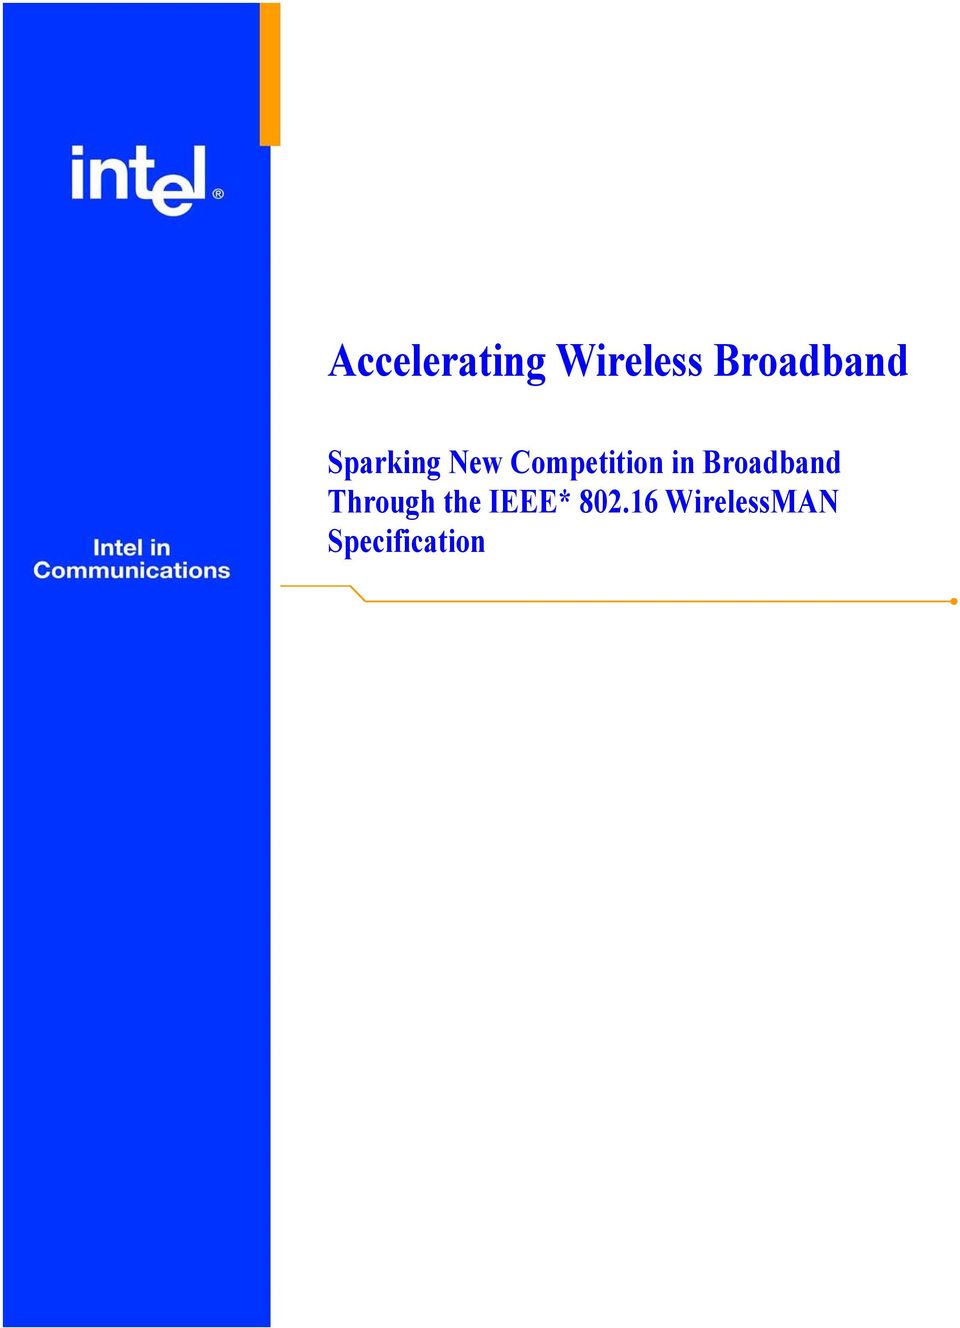 Competition in Broadband